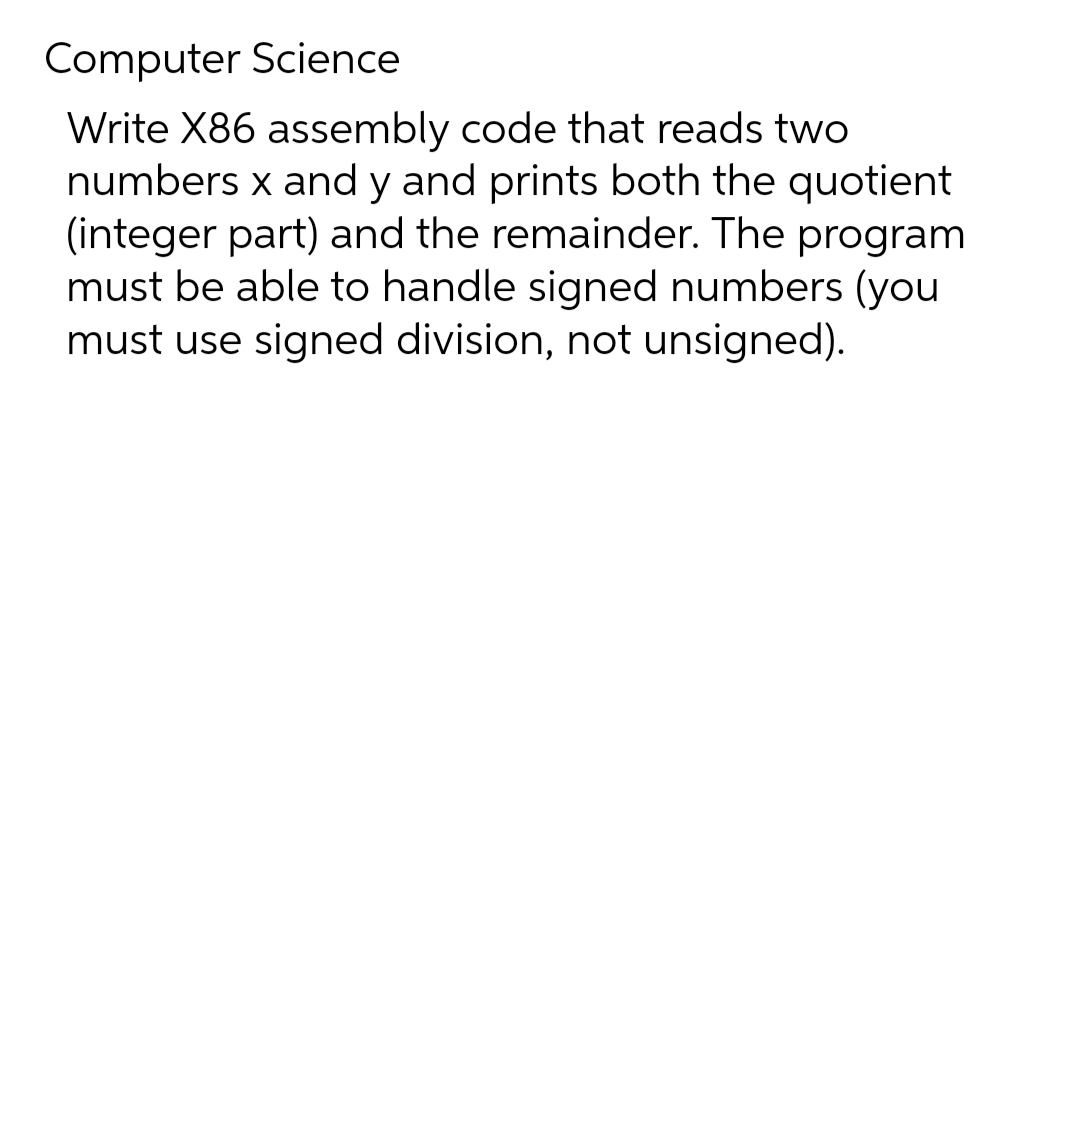 Computer Science
Write X86 assembly code that reads two
numbers x and y and prints both the quotient
(integer part) and the remainder. The program
must be able to handle signed numbers (you
must use signed division, not unsigned).